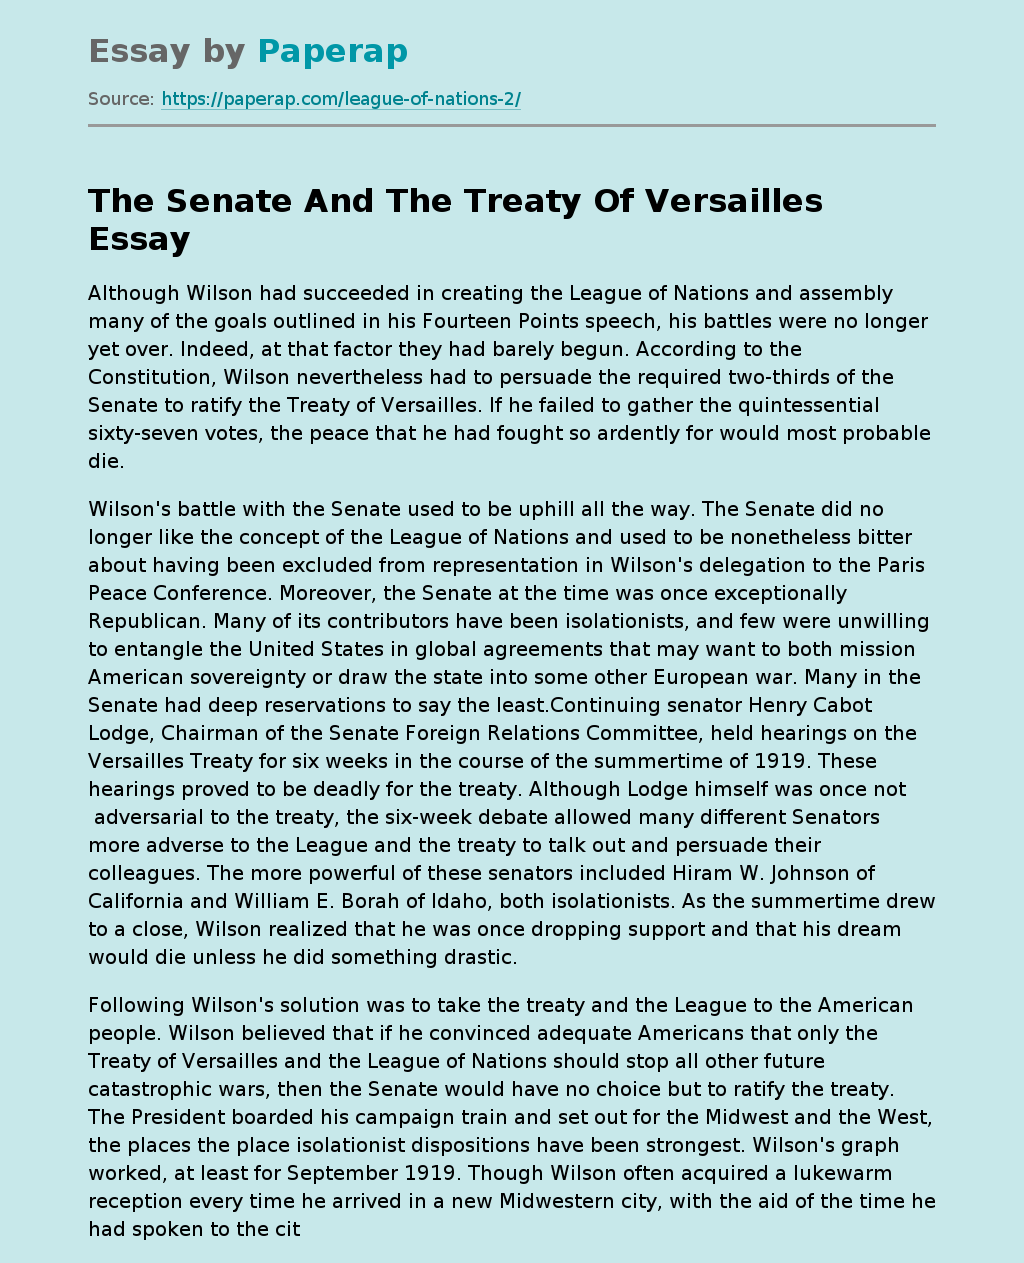 The Senate And The Treaty Of Versailles